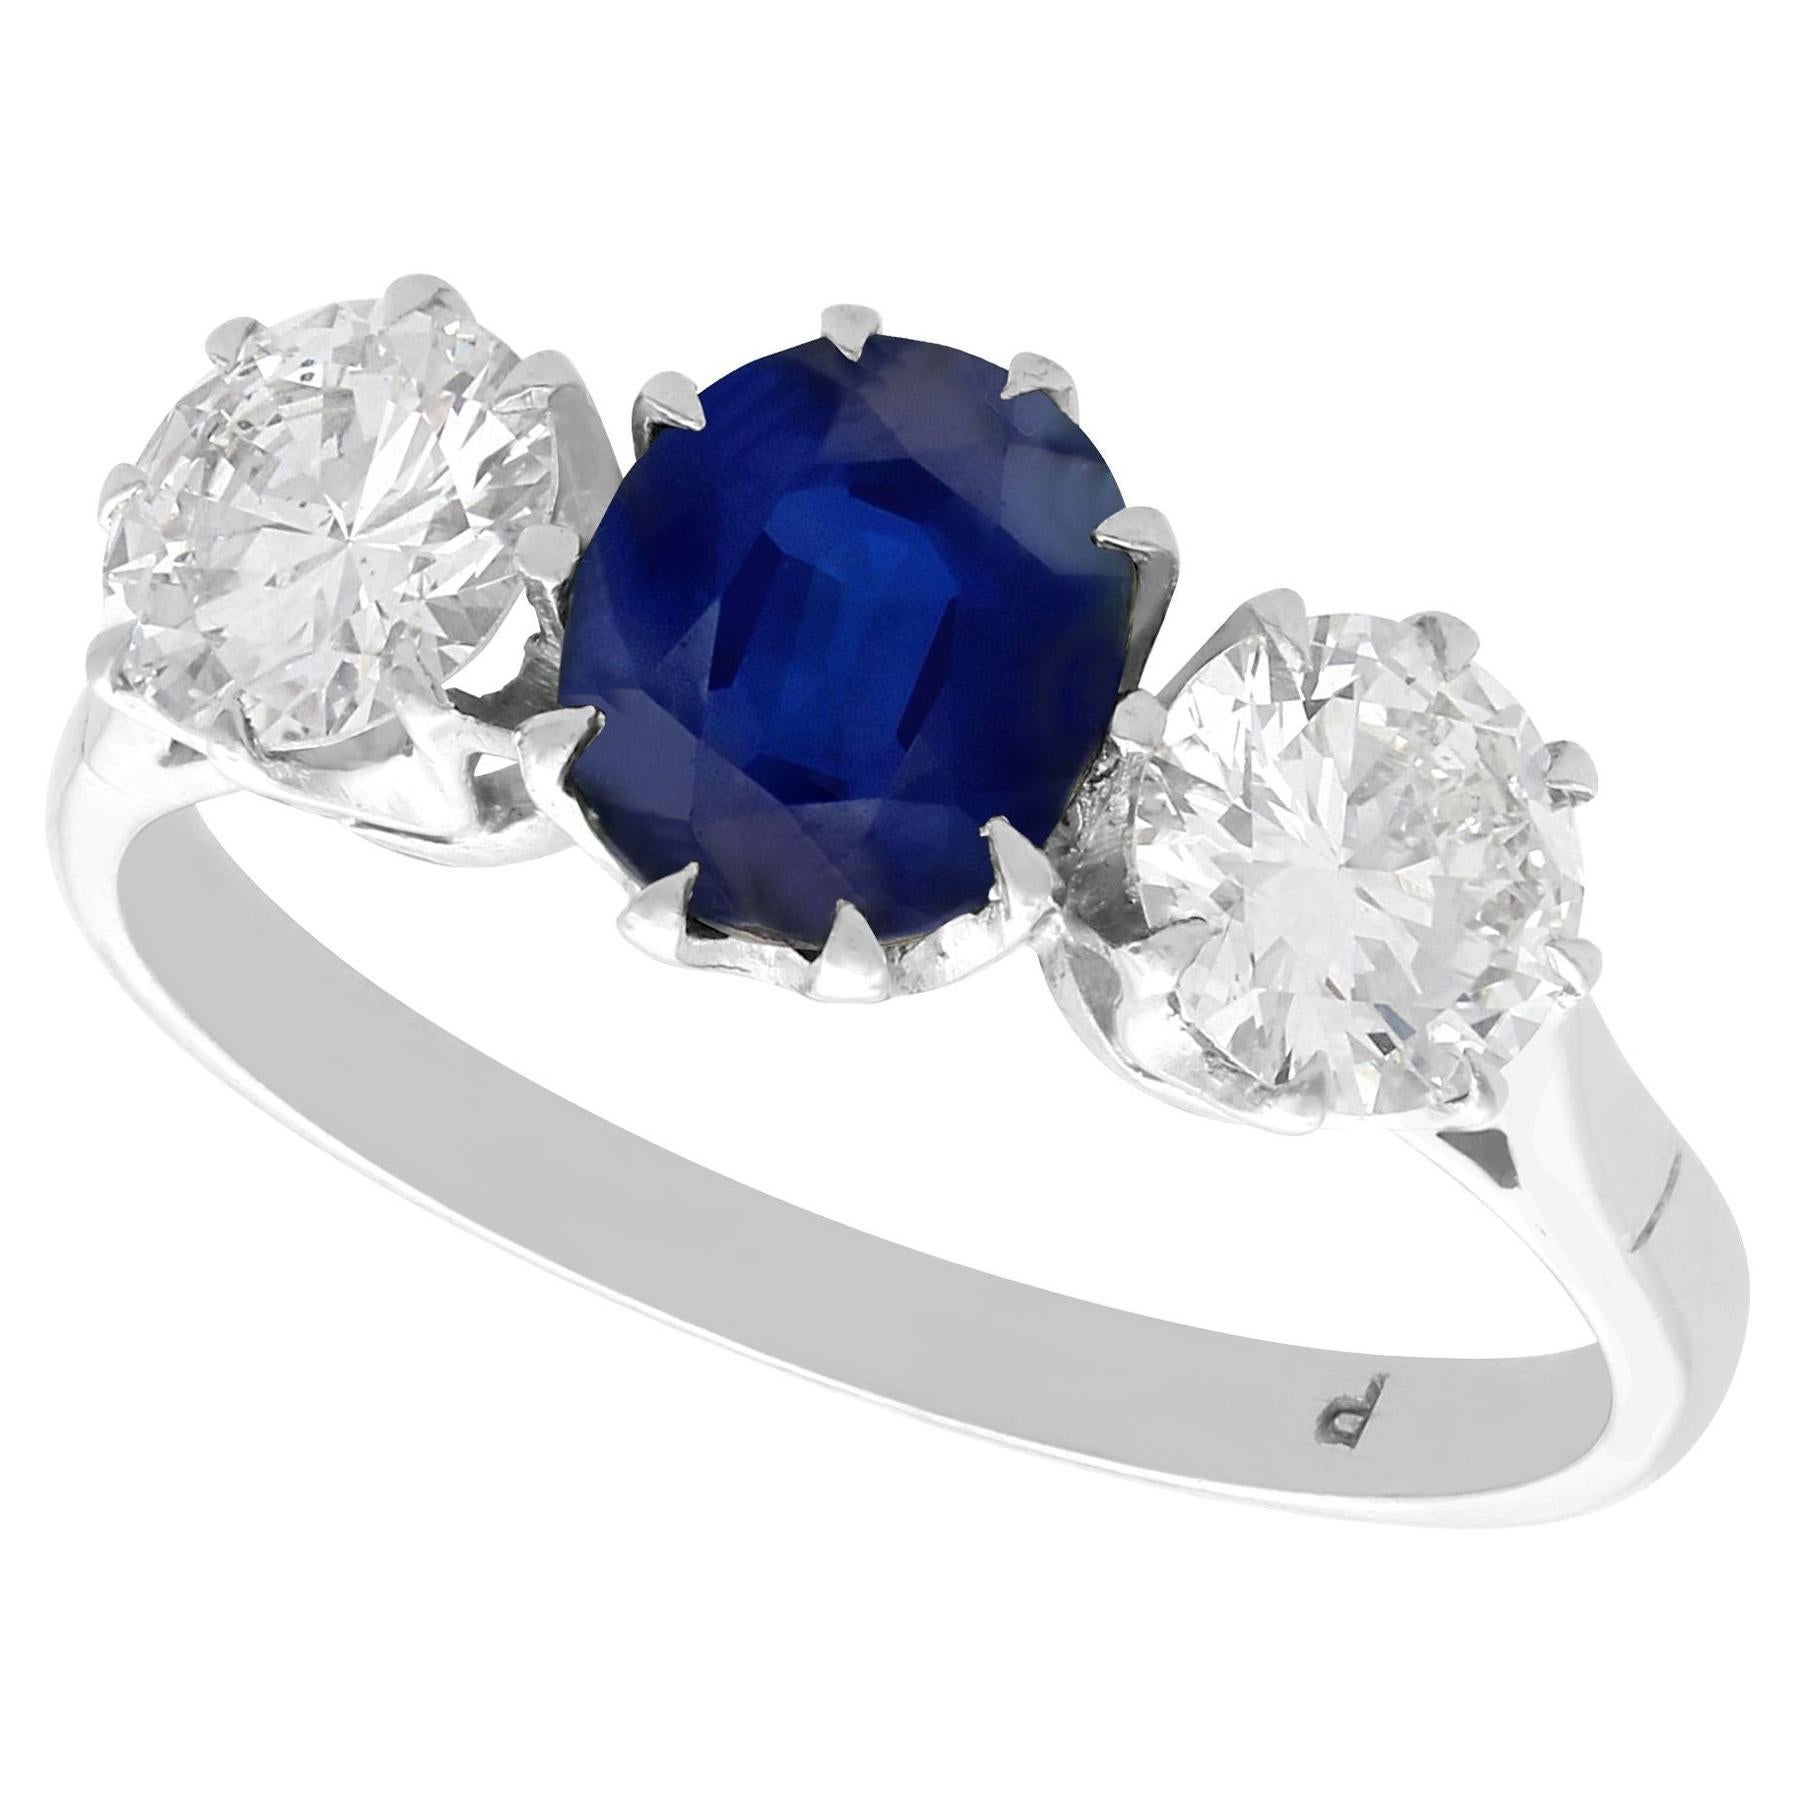 Antique 1.80 Carat Sapphire and 1.35 Carat Diamond White Gold Trilogy Ring For Sale